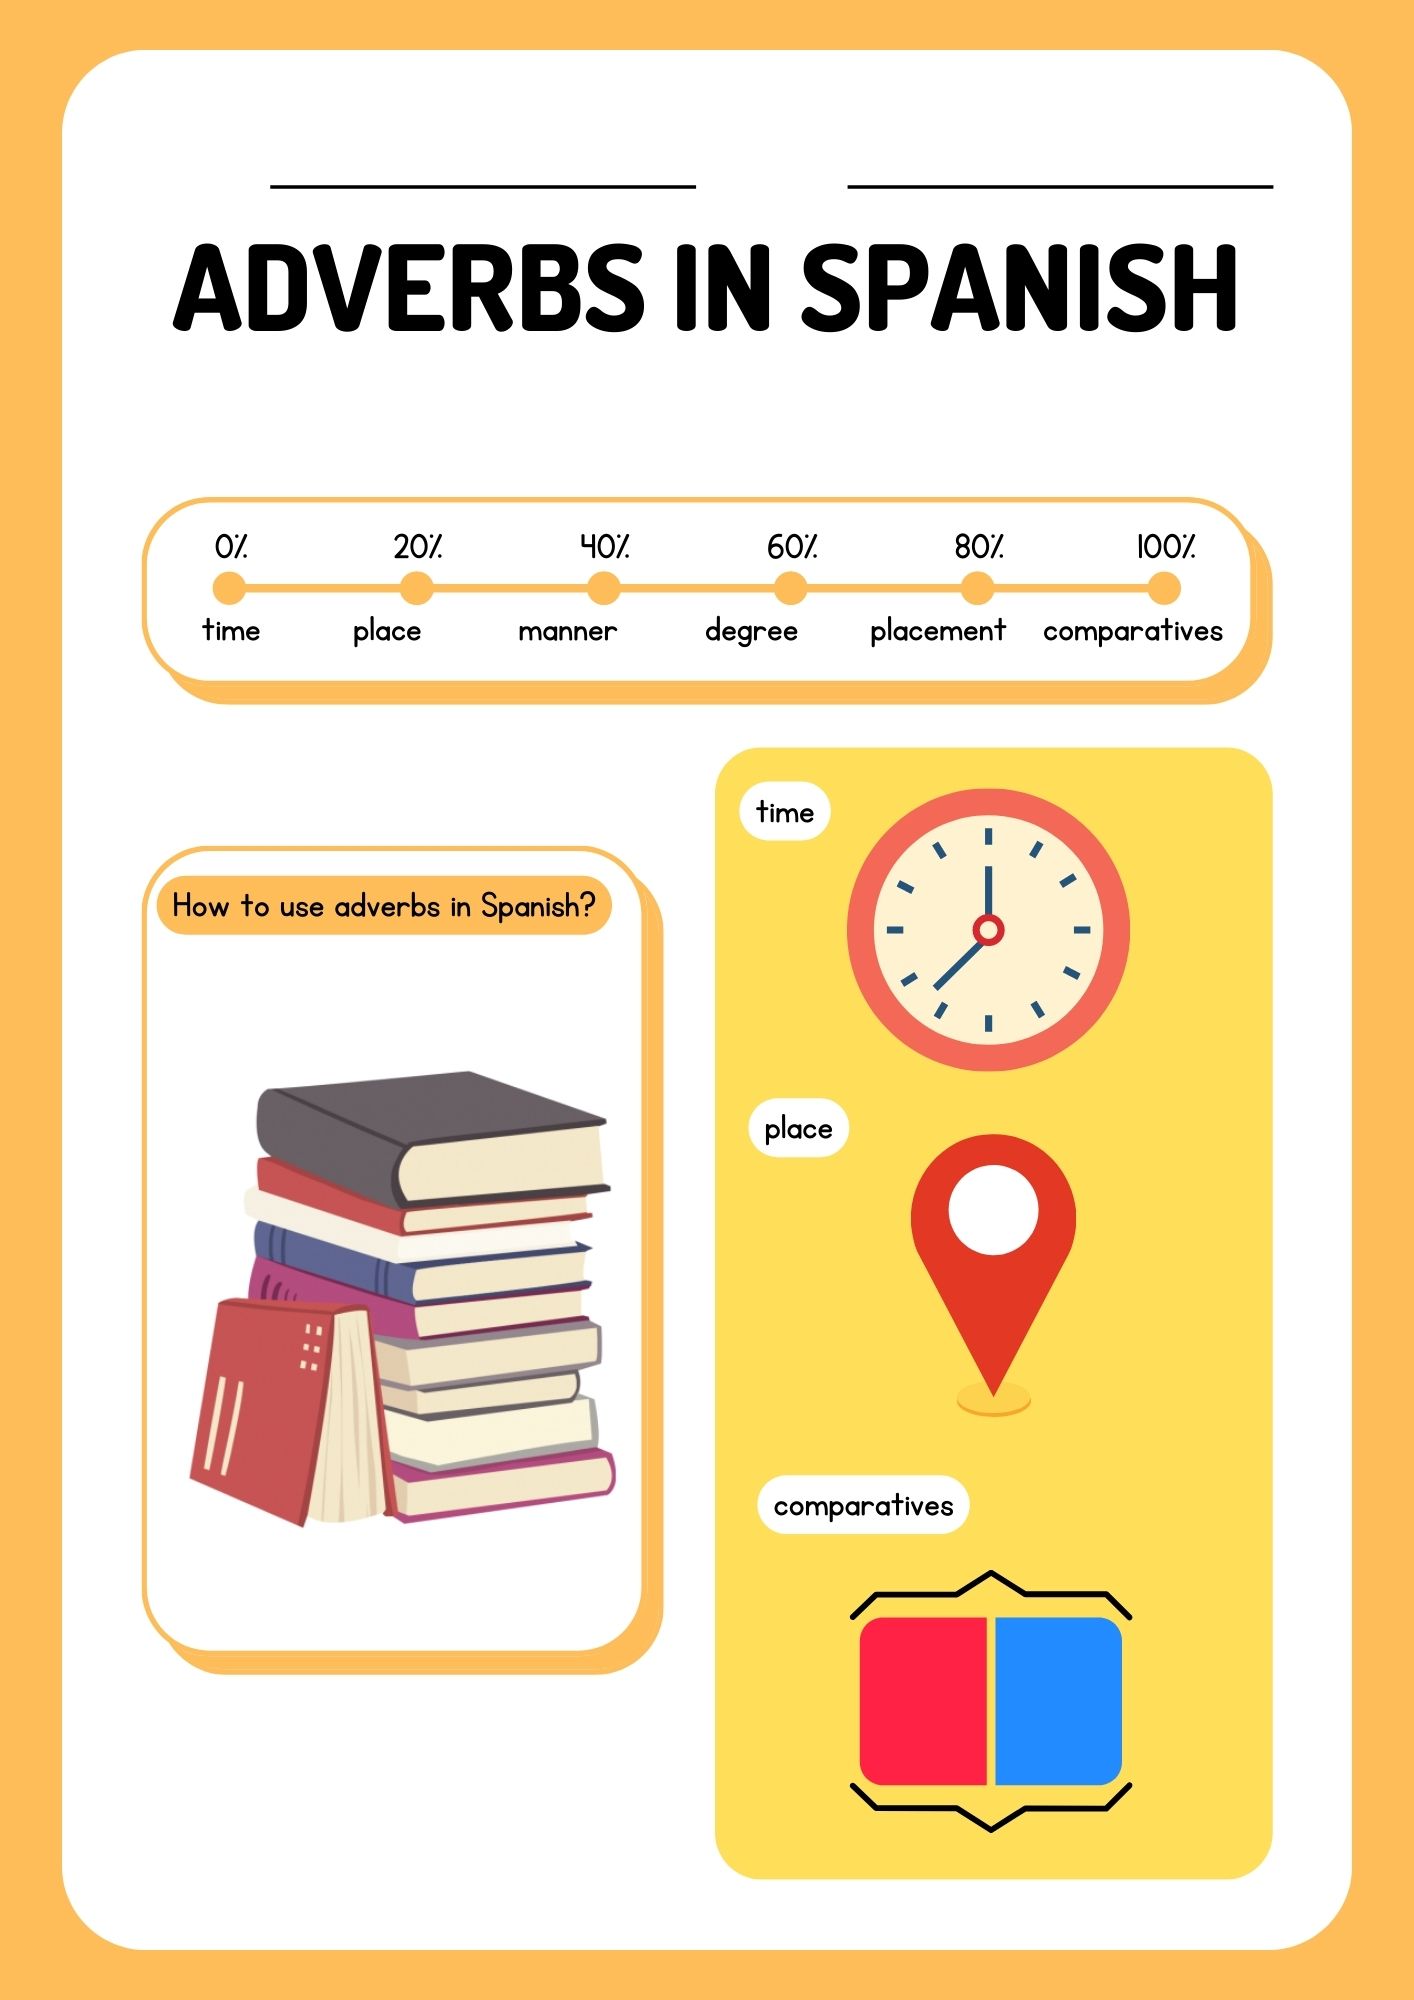 How are adverbs used in Spanish?